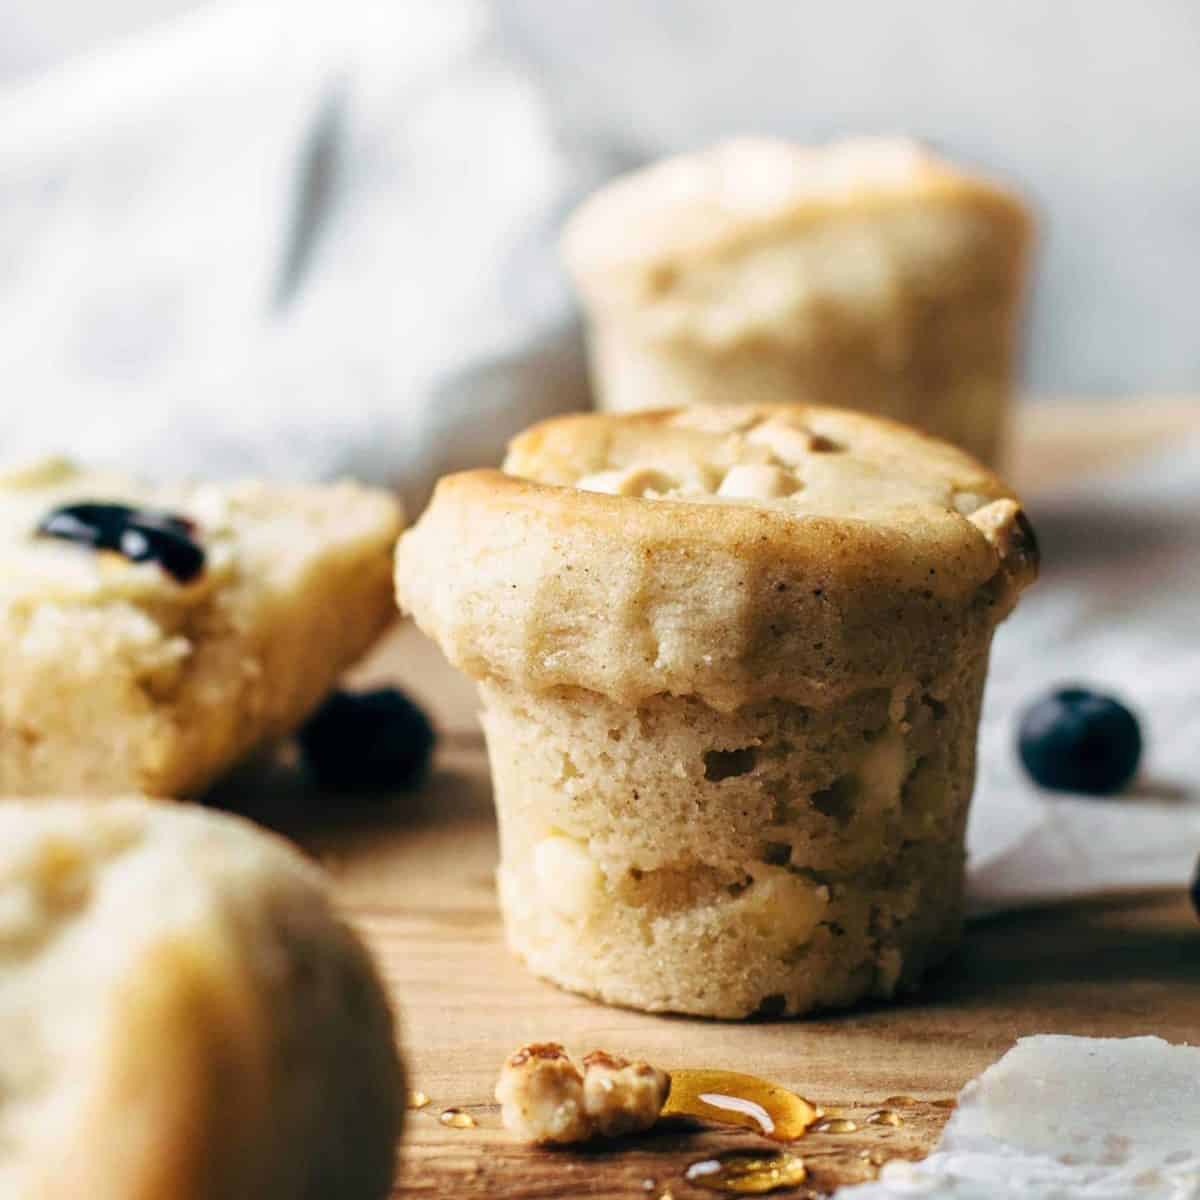 Baked muffins with white chocolate chips on a wooden table